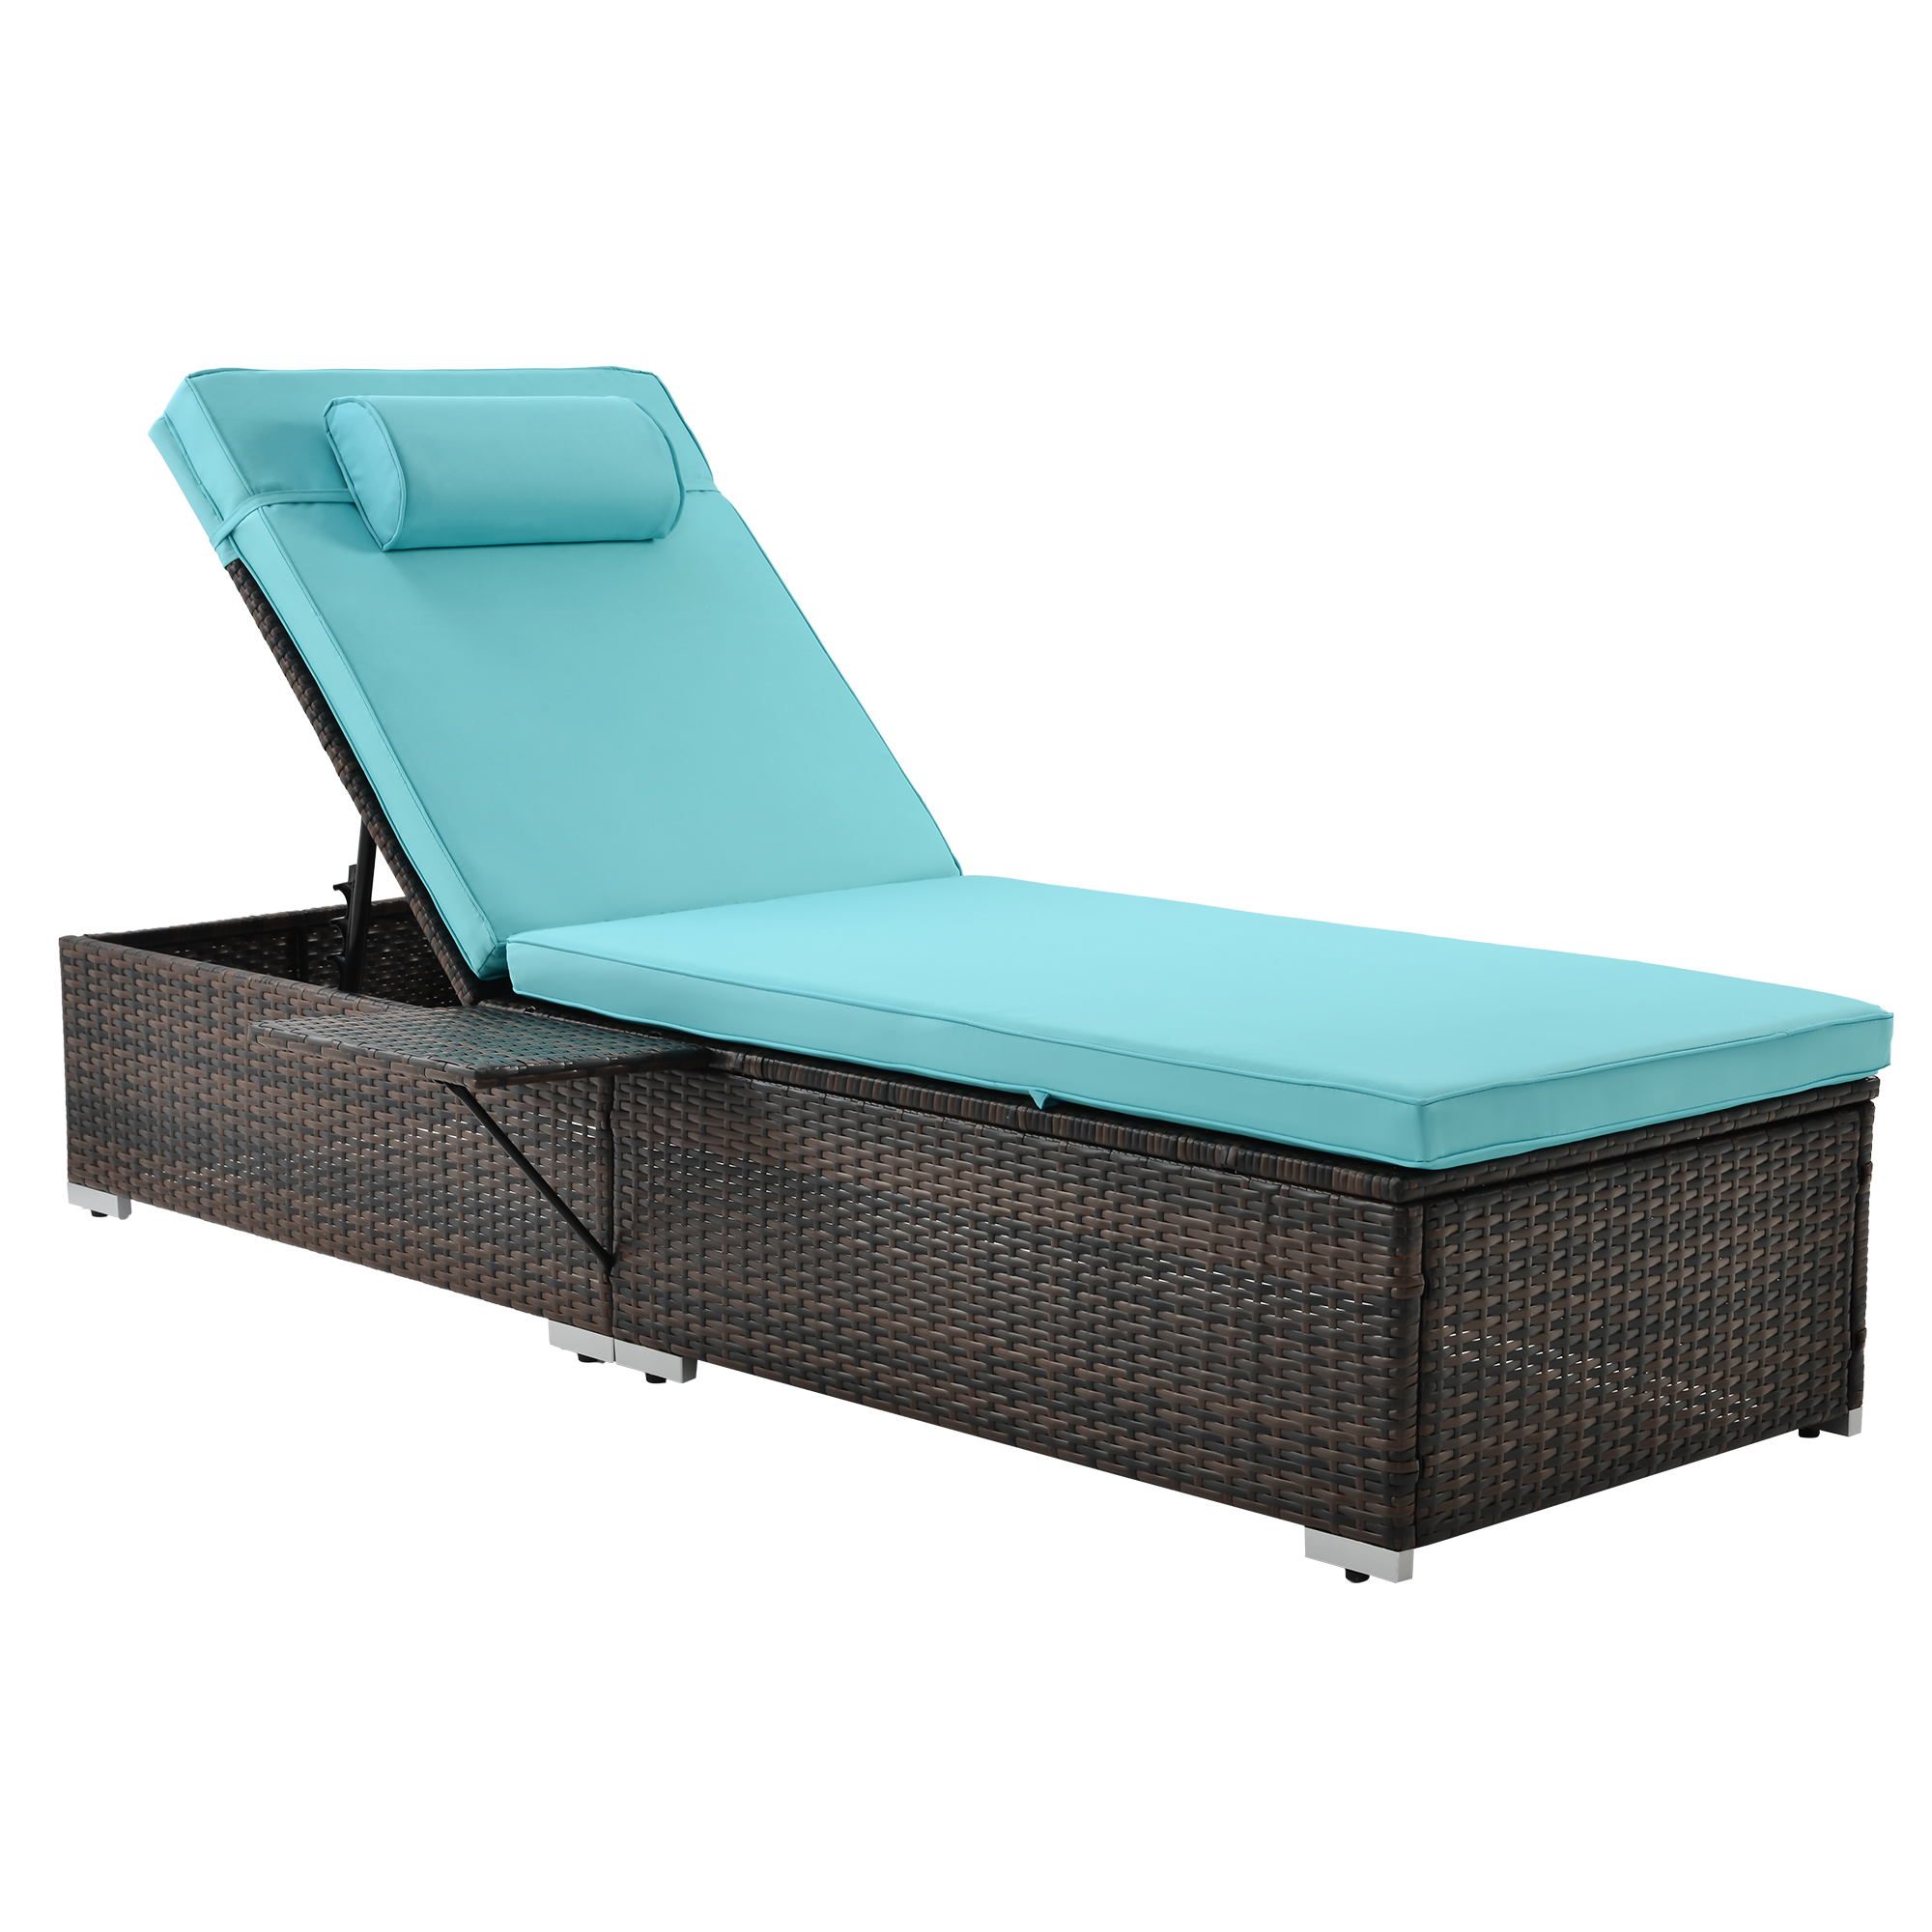 2 Piece Outdoor Patio Chaise Lounge, PE Wicker Lounge Chairs with Adjustable Backrest Recliners and Side Table, Reclining Chair Furniture Set with Cushions for Poolside Deck Patio Garden, K2698 - image 4 of 11